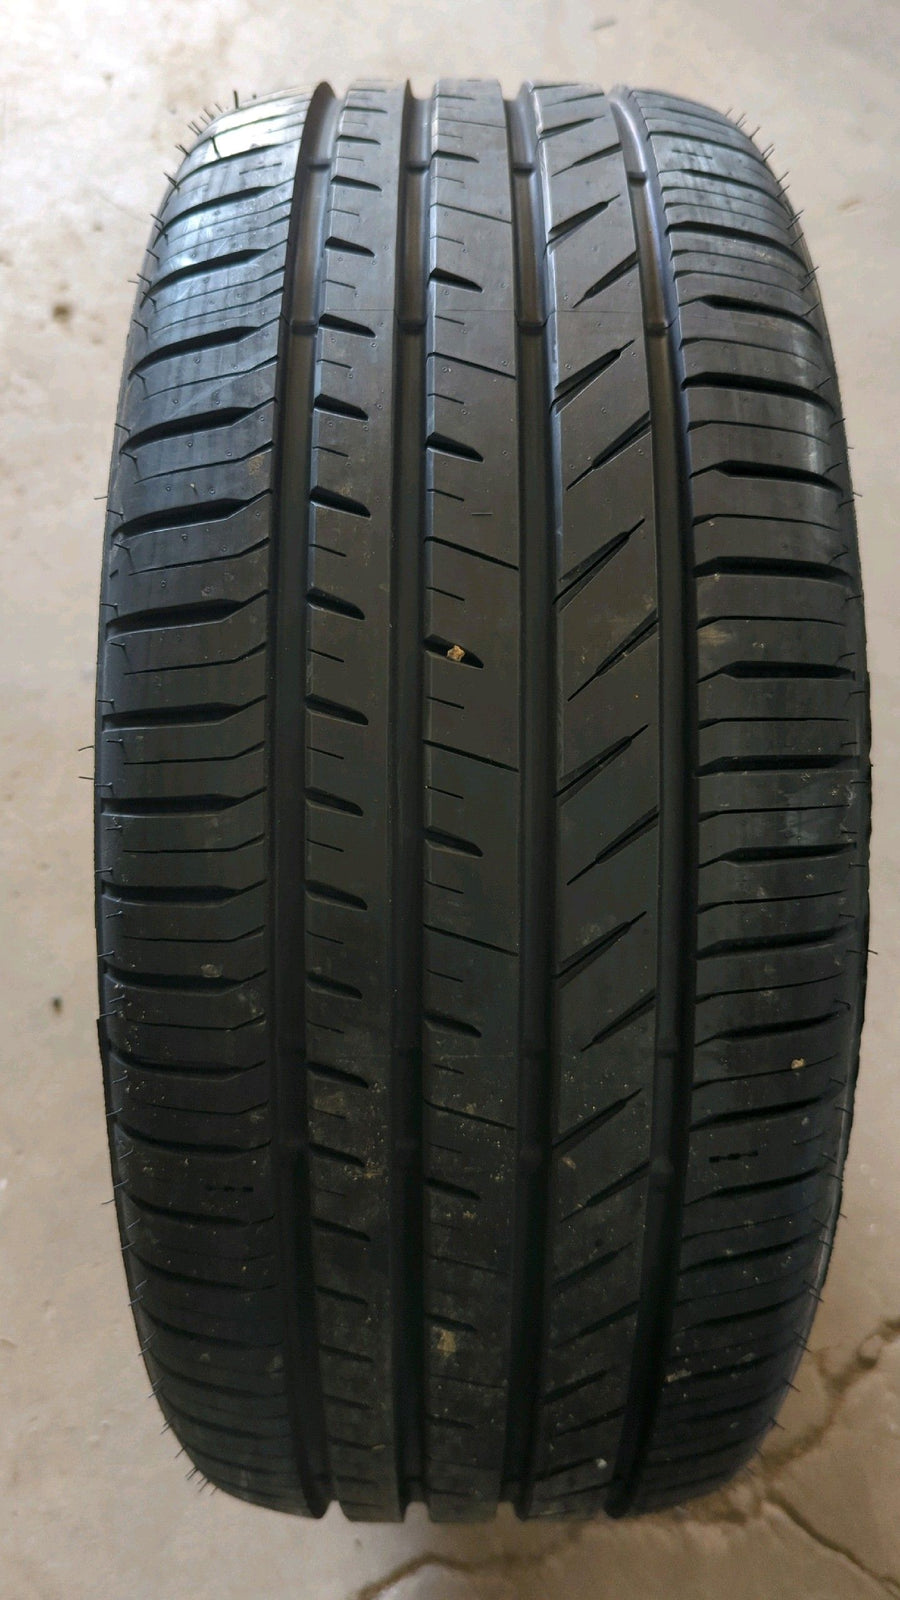 4 x P225/45R18 95Y Toyo Proxes Sport A/S